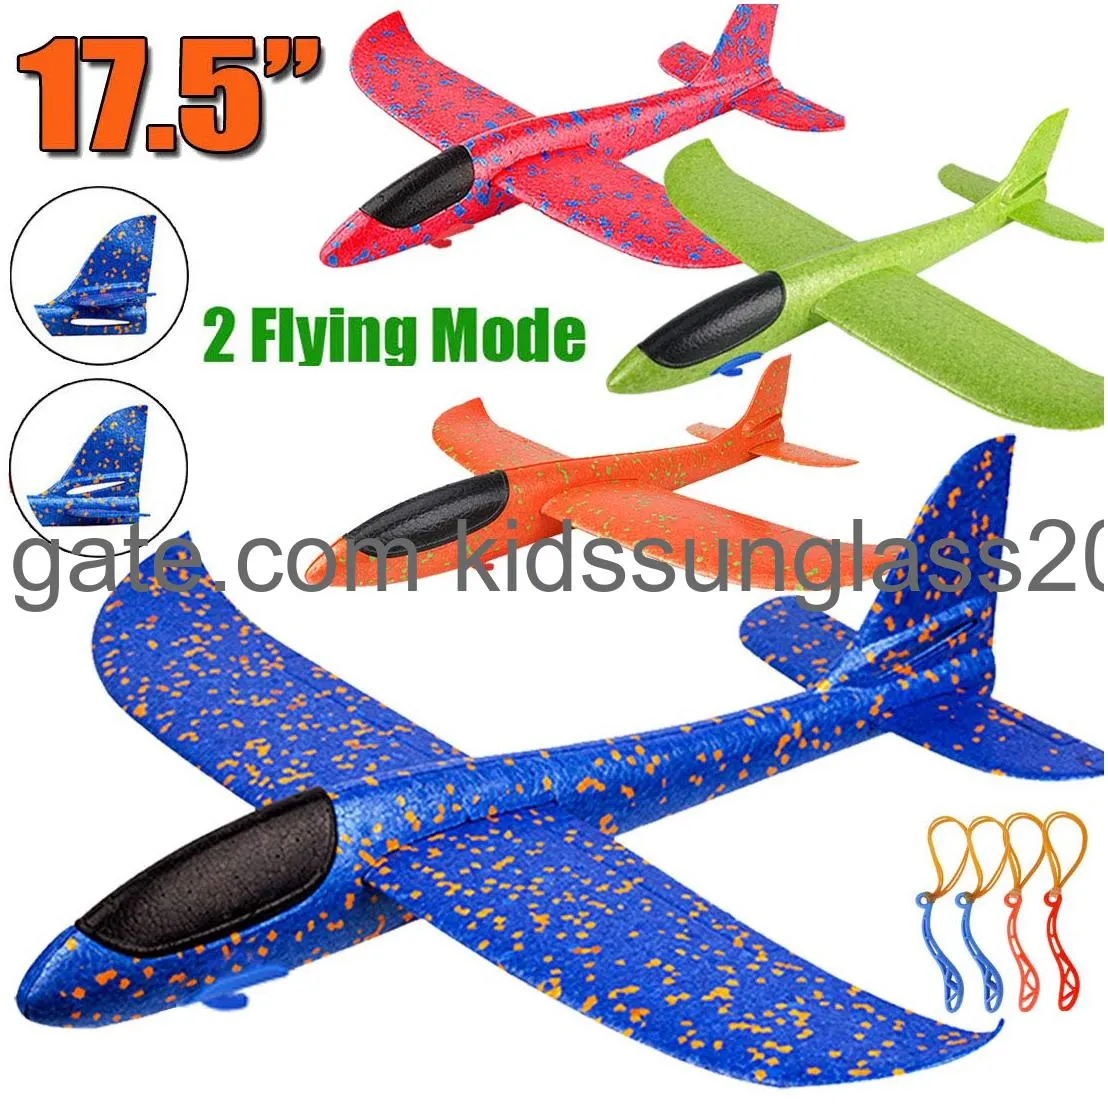 airplane toys upgrade 17.5 large throwing foam plane 2 flight mode glider plane flying toy for kids gifts for 3 4 5 6 7 year old boy outdoor sport toys birthday party favors foam airplane